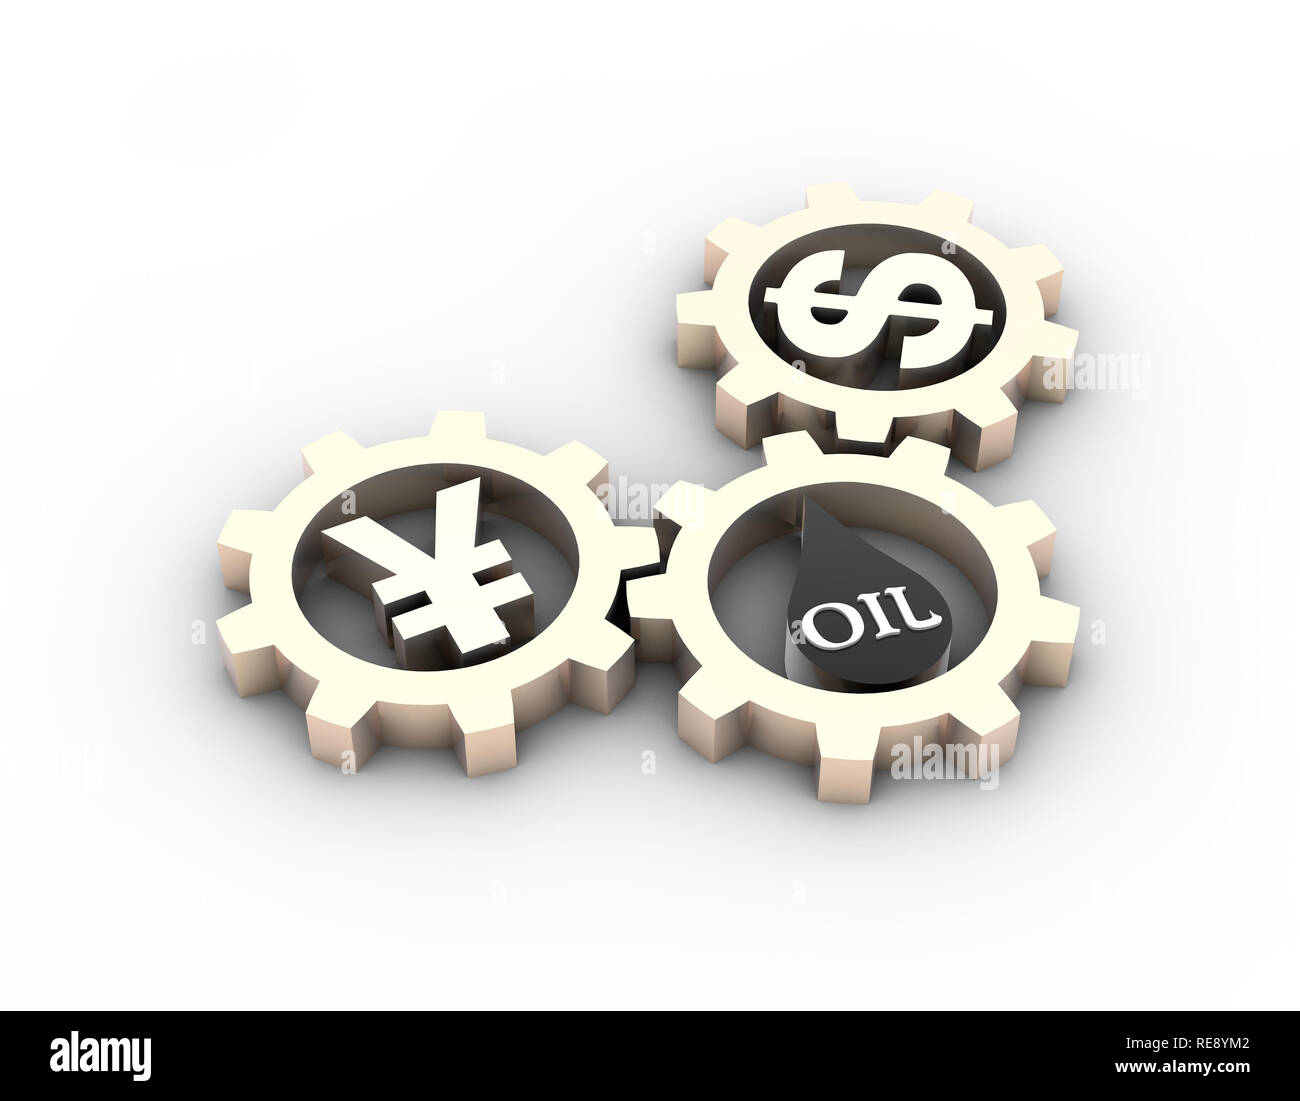 Exchange of RMB and oil, oil and renminbi, energy money, currency symbols and gears Stock Photo